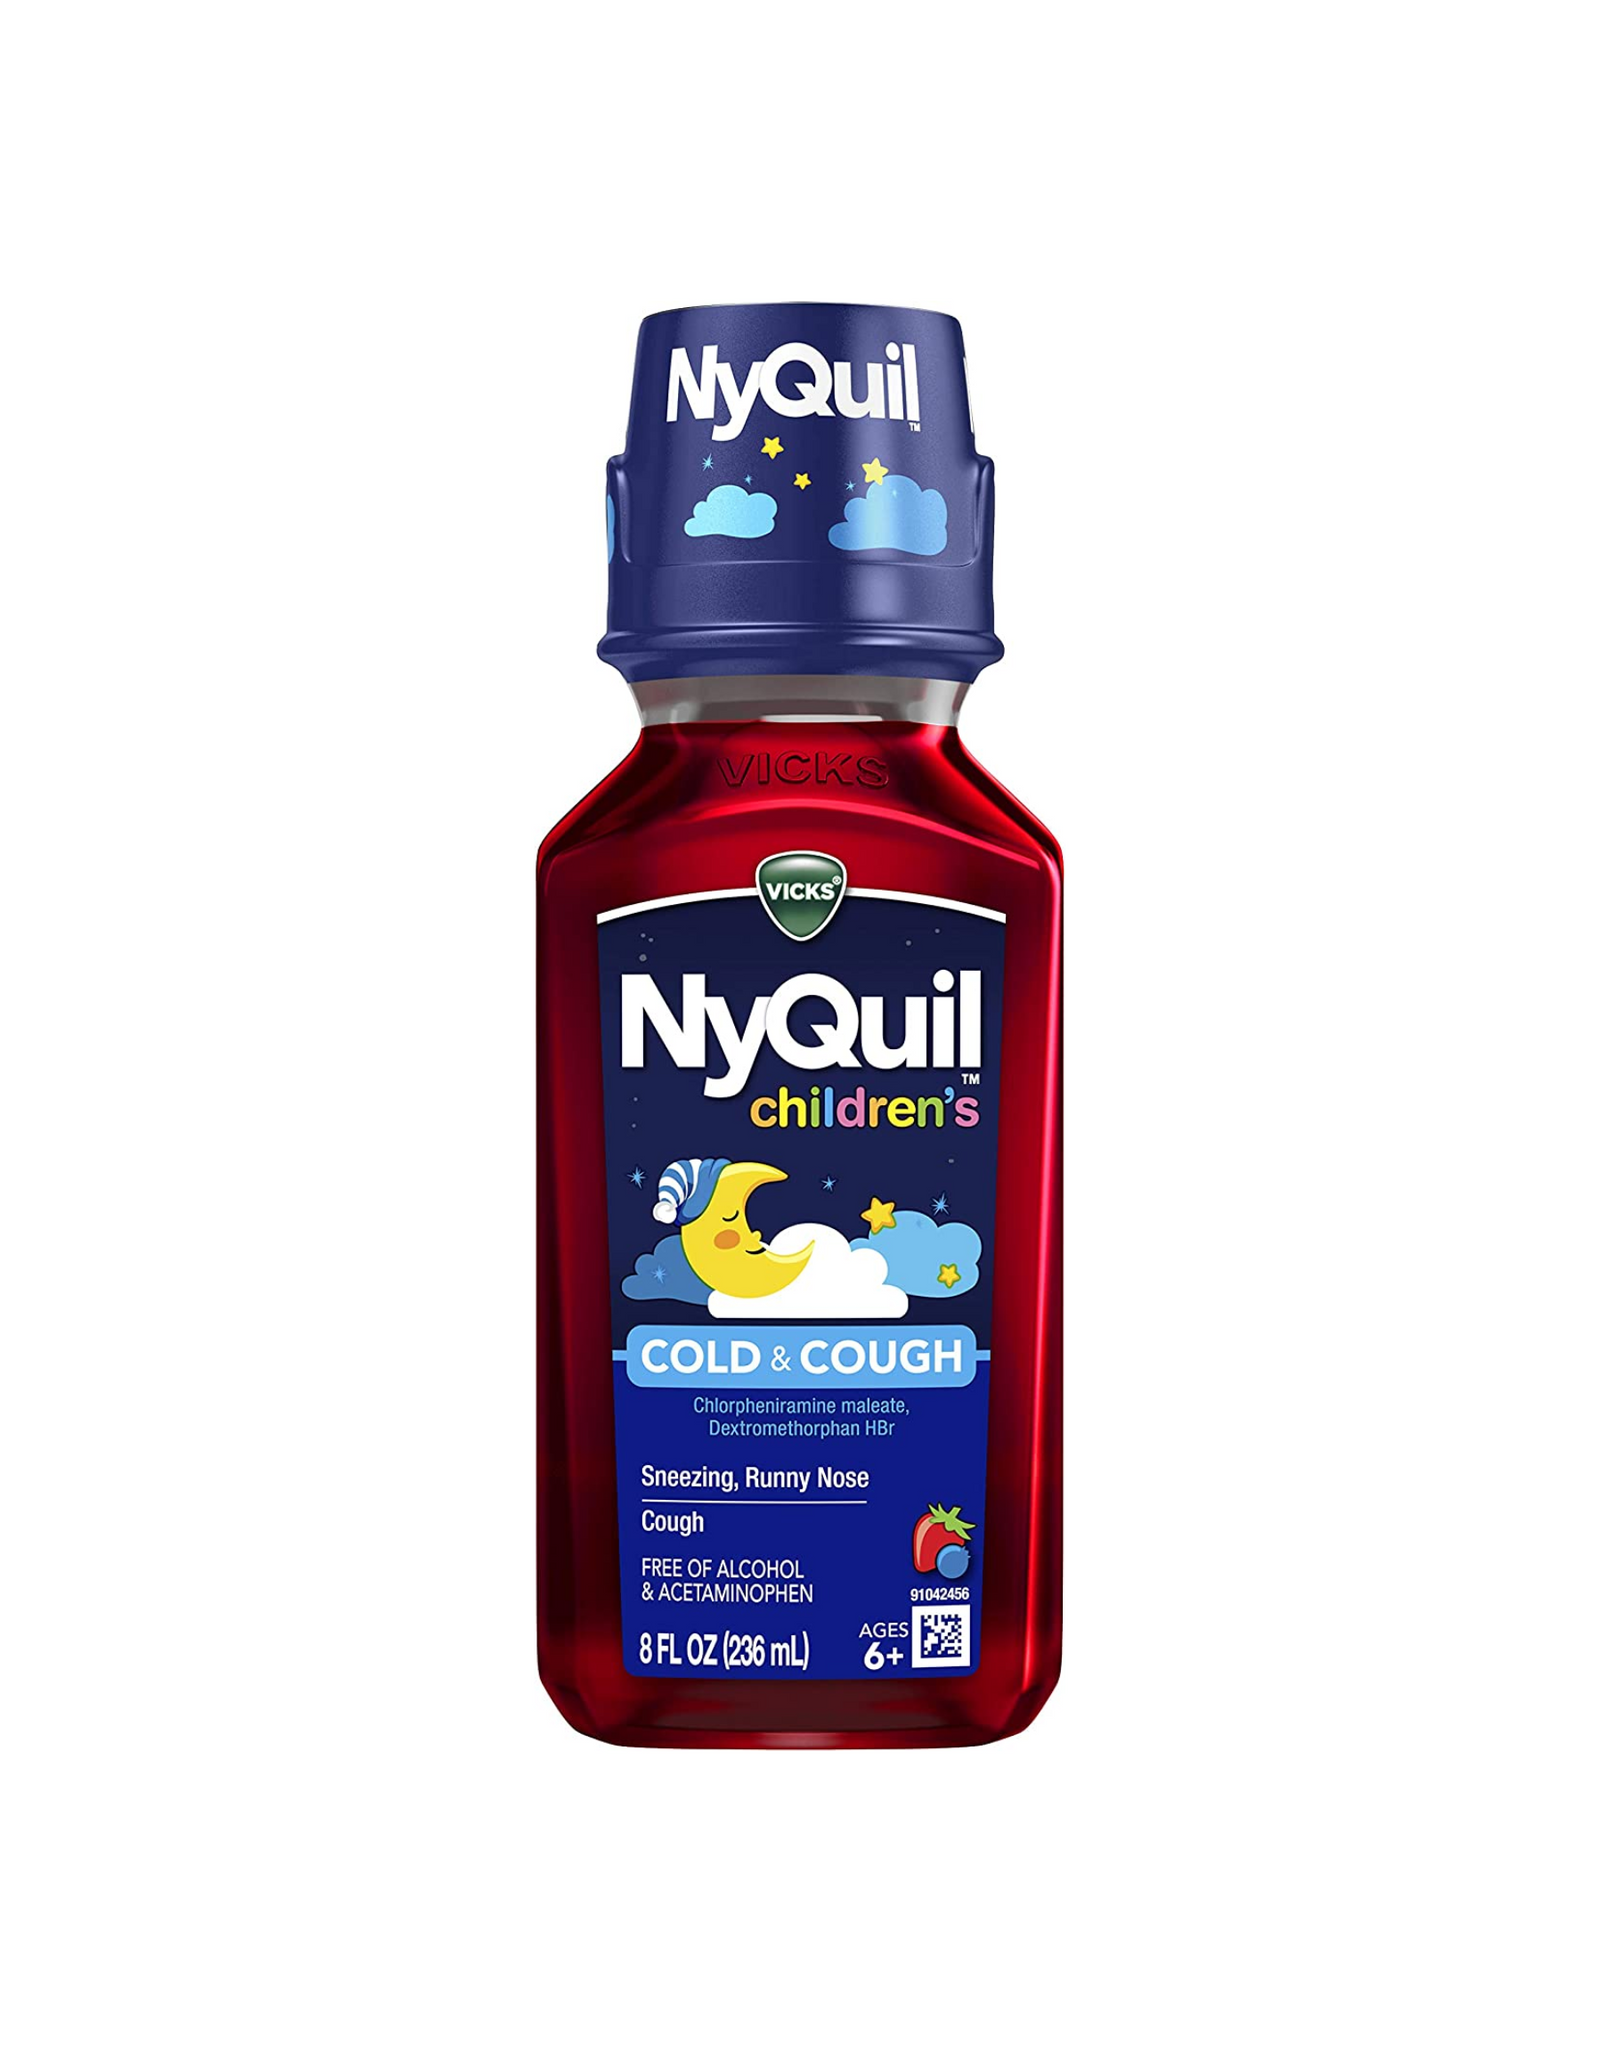 Vicks NyQuil Children's, Nighttime Cold & Cough Multi-Symptom Relief, Relieves Sneezing, Runny Nose, Cough, Berry Flavor, 8 Fl Oz